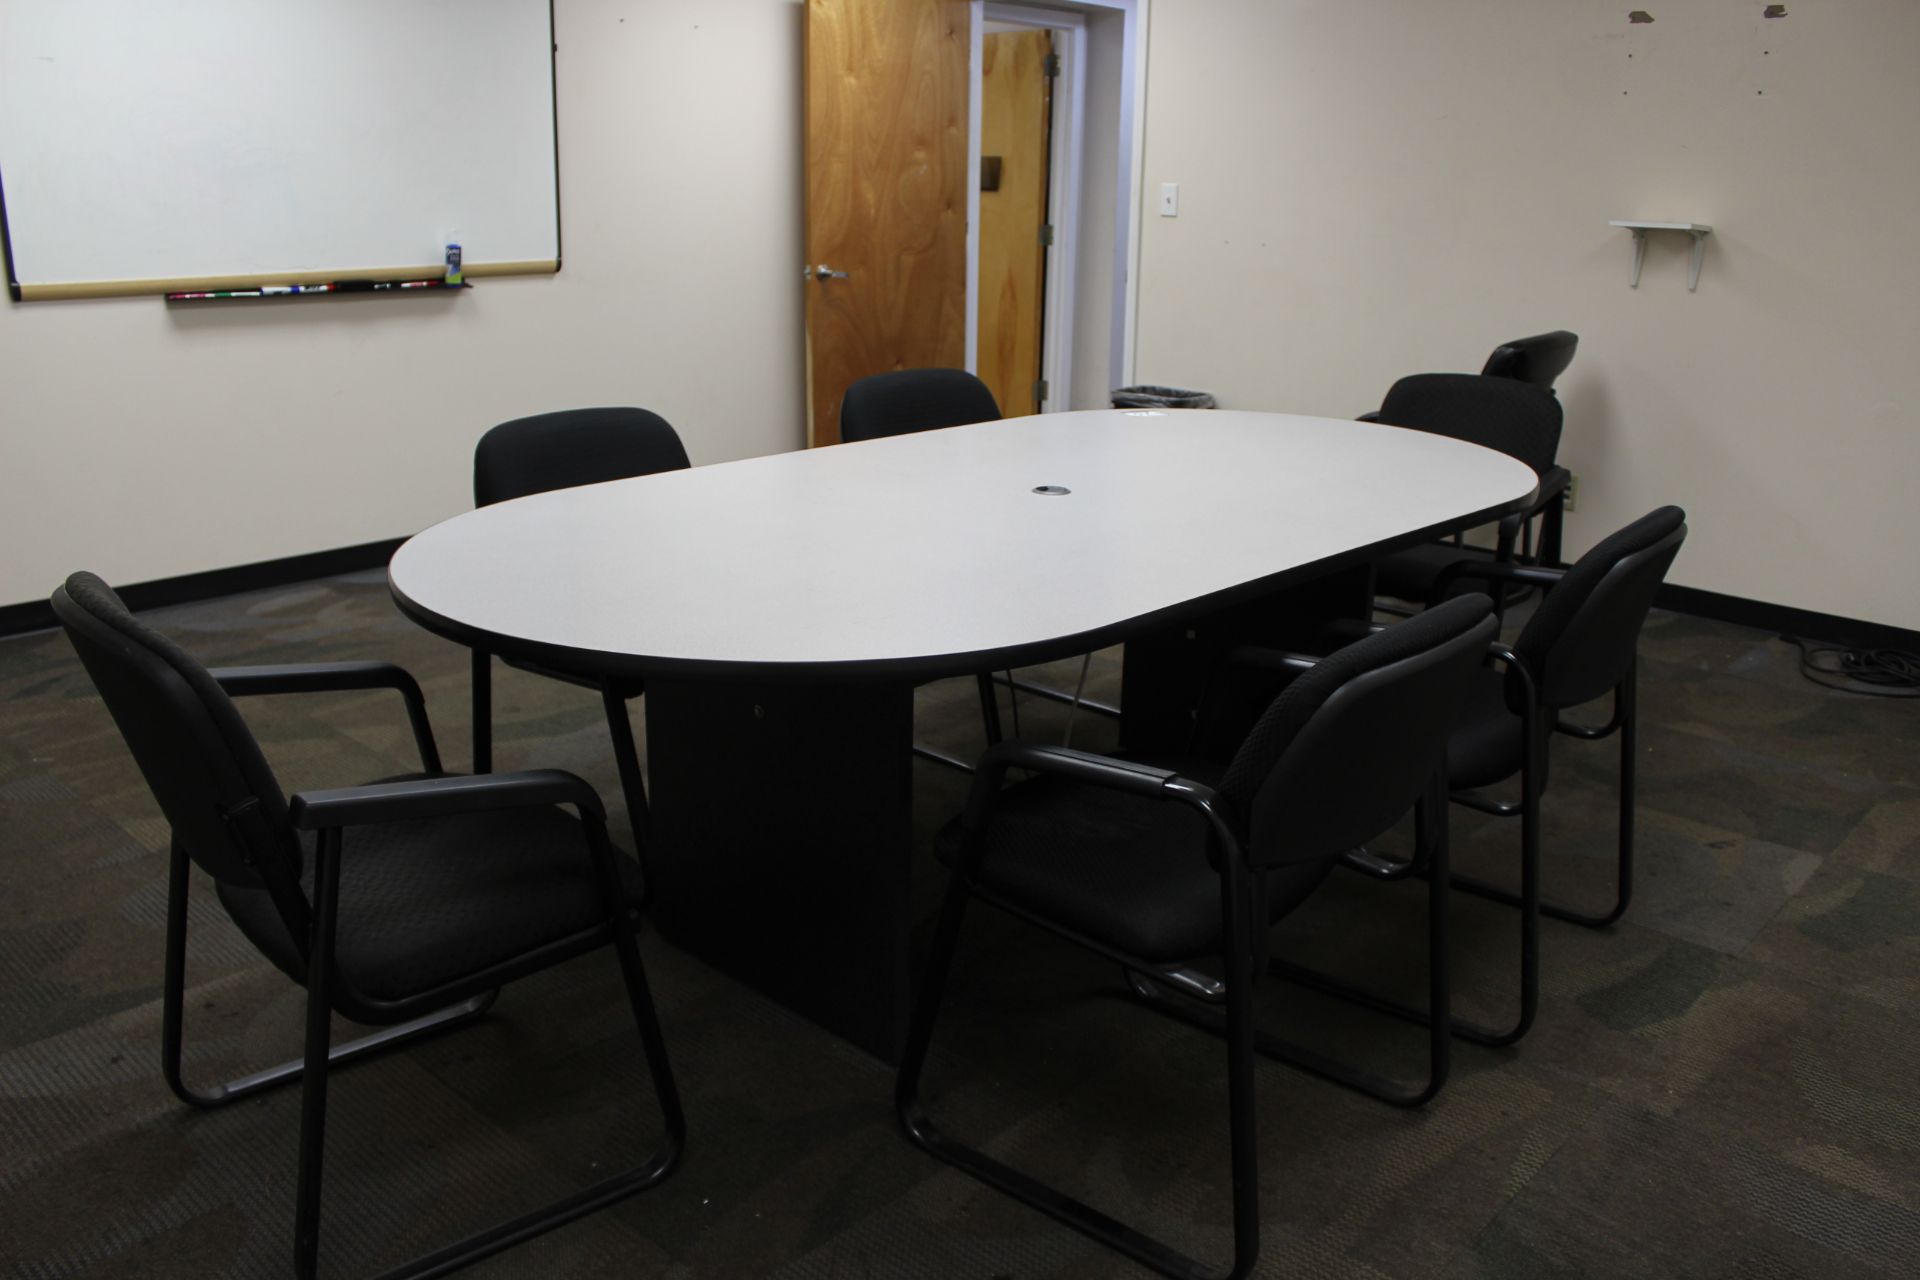 CONFERENCE TABLE, CHAIRS, AND 2 WHITE BOARDS - Image 2 of 4